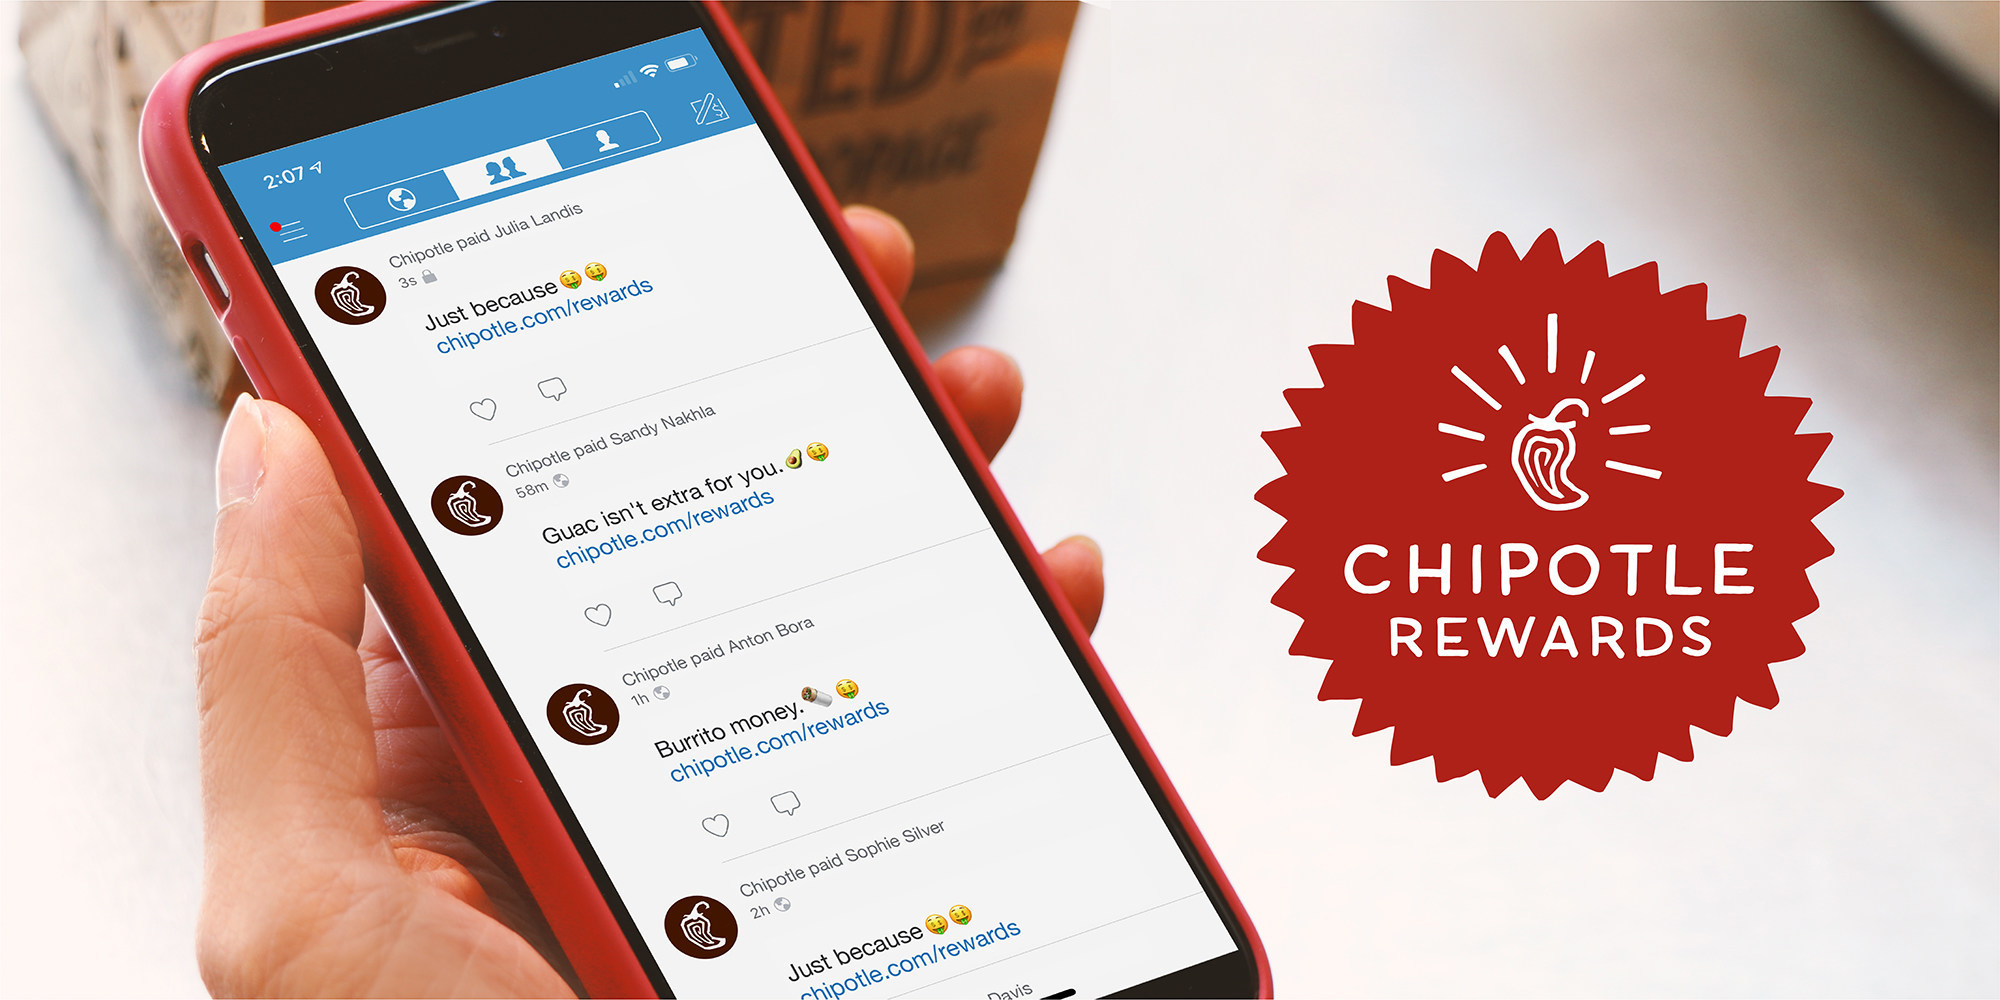 Chipotle Rewards Launches By Giving Fans A Quarter Of A Million